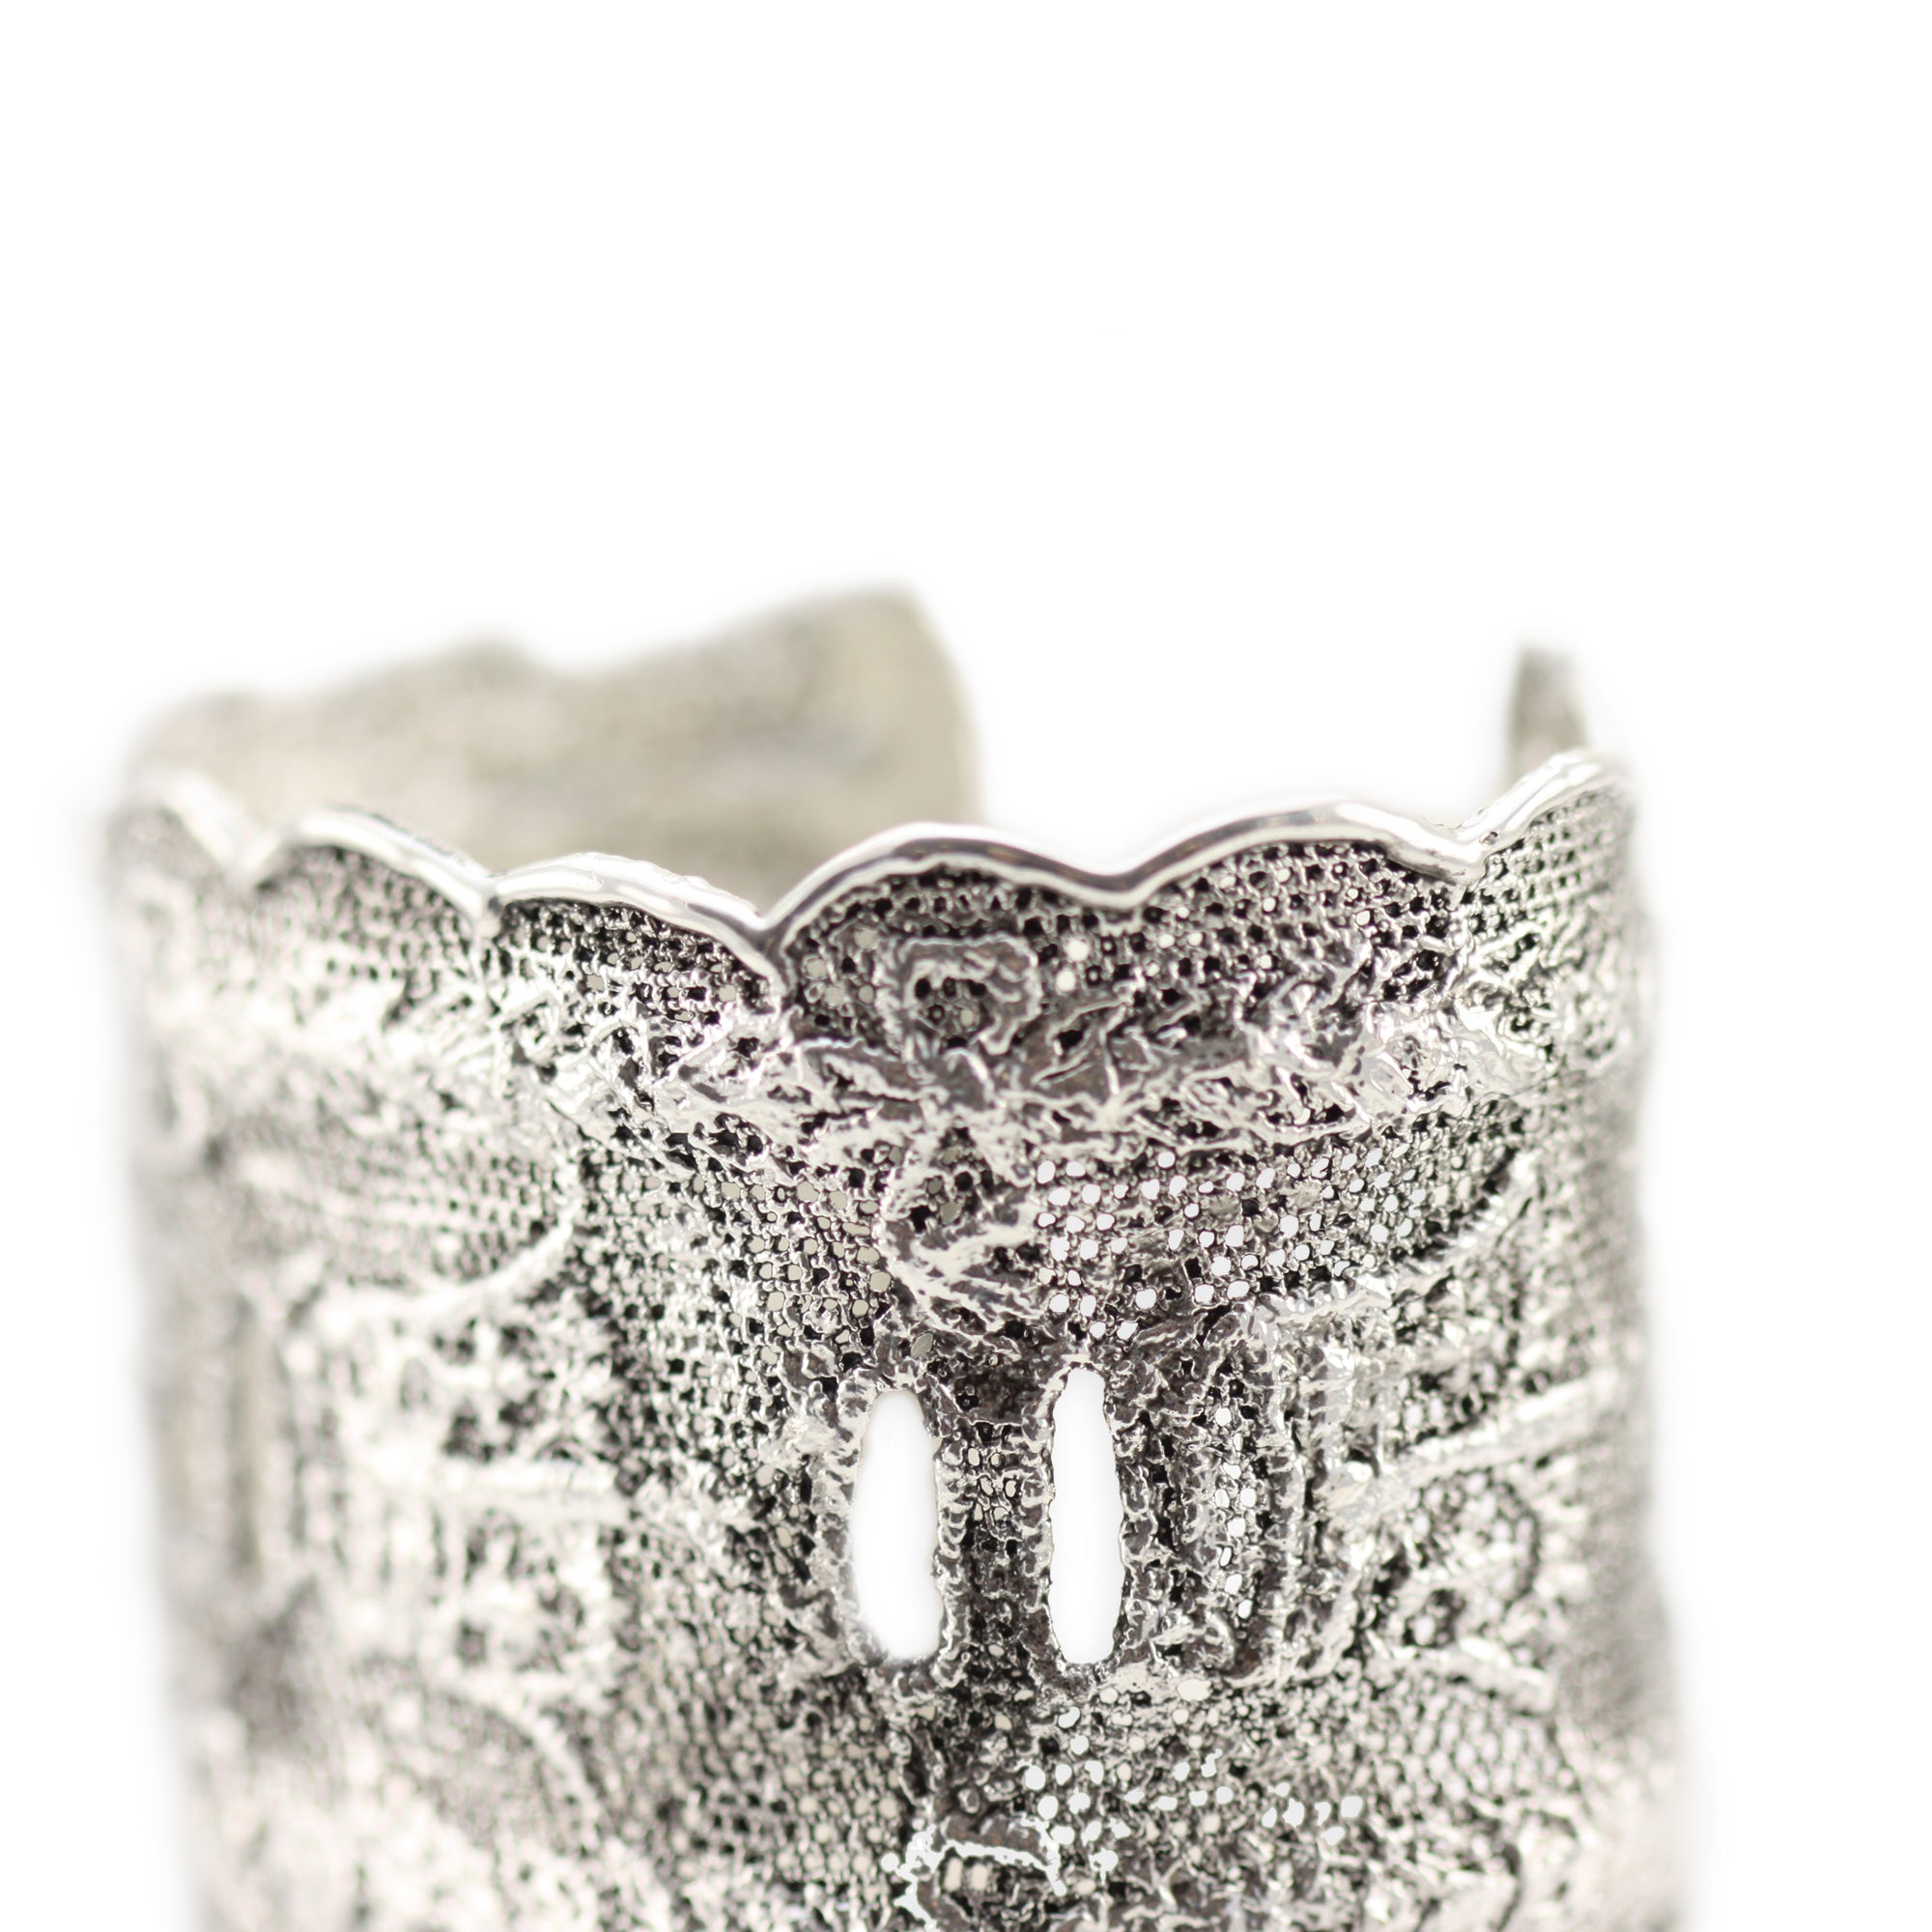 Lace cuff bracelet Elizabeth made with rare royal British lace dipped in sterling silver.